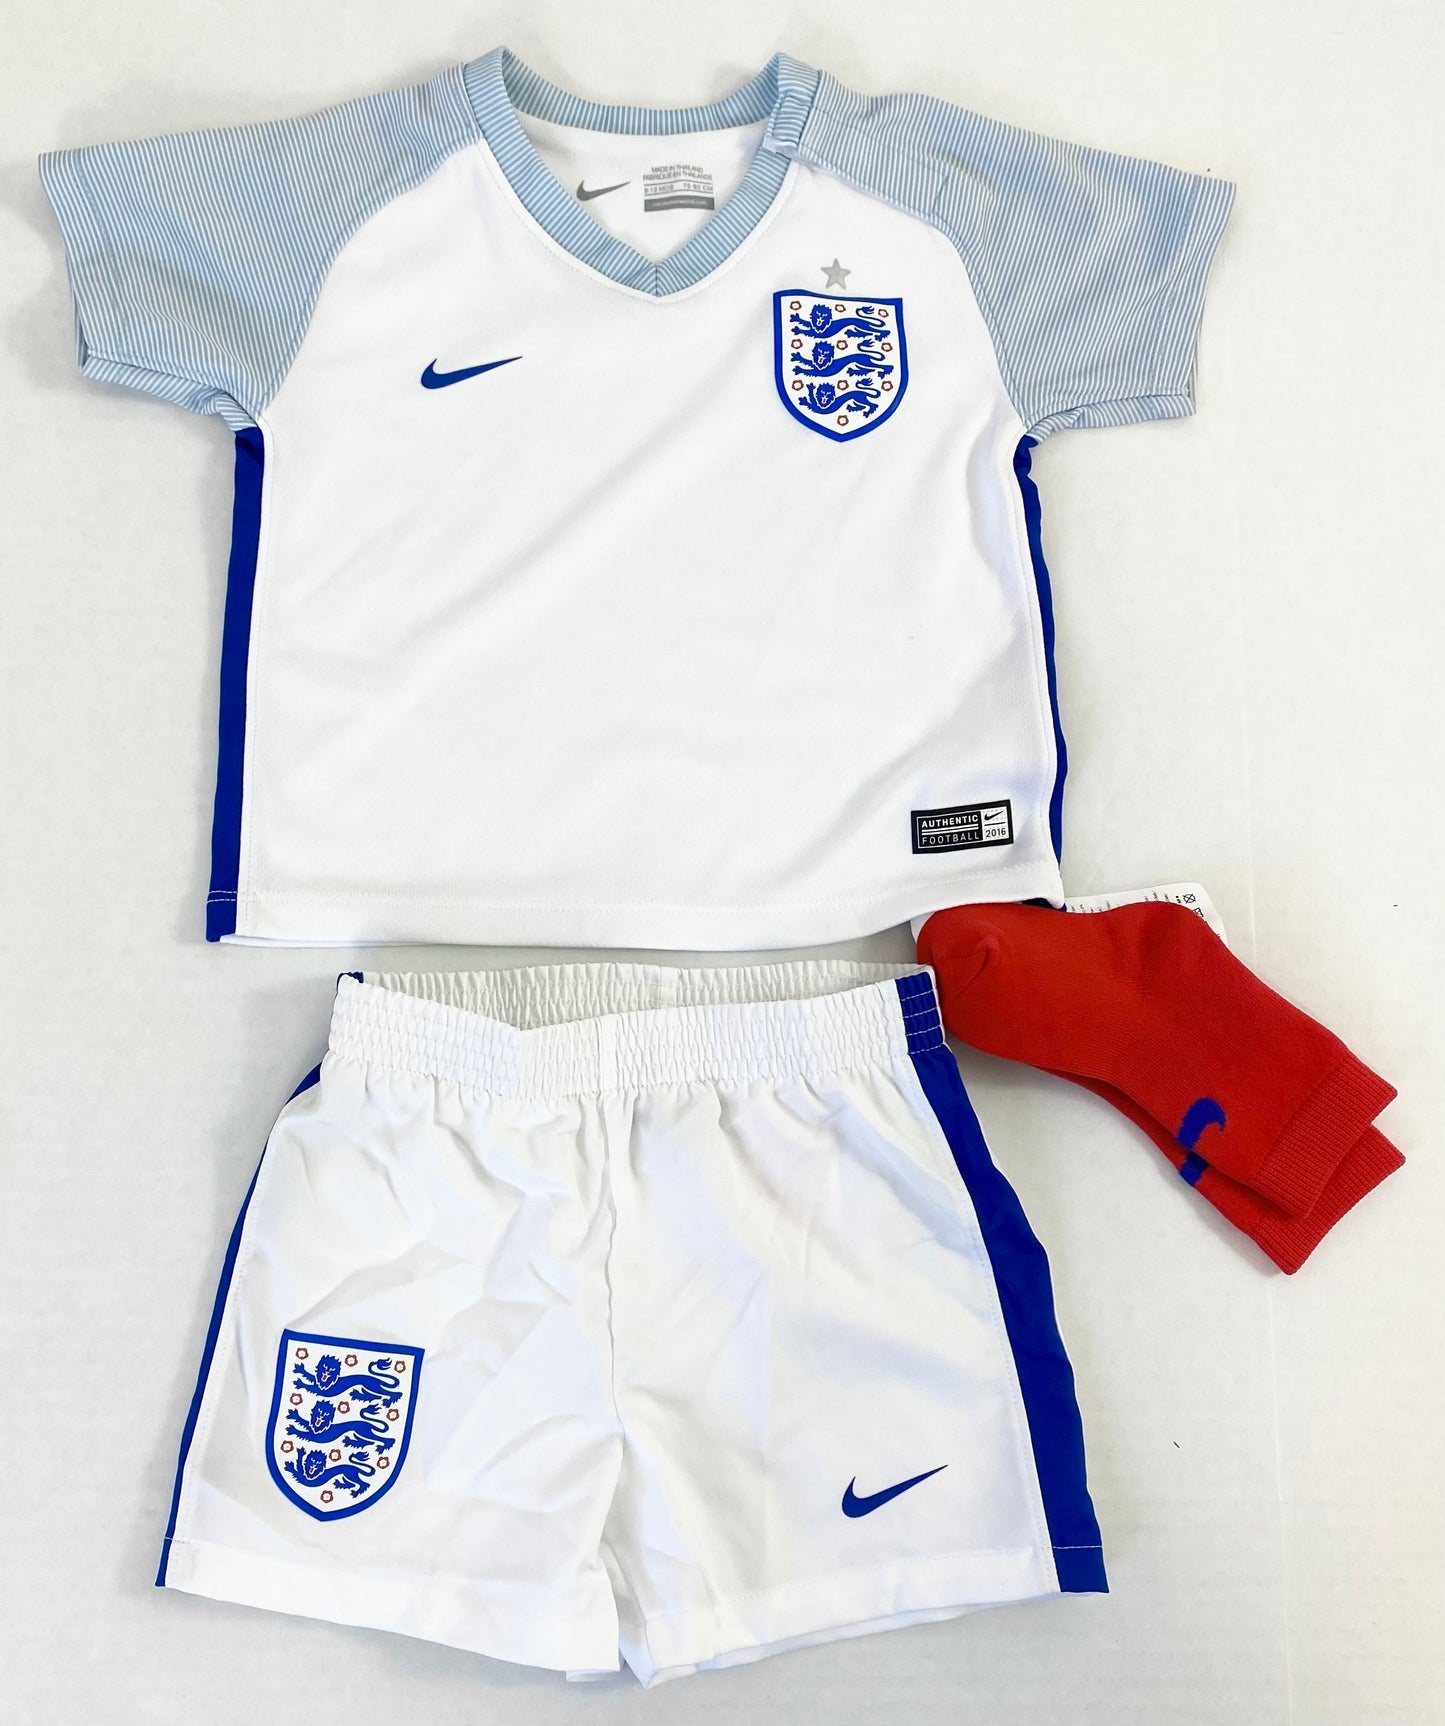 9-12 months official England Nike soccer outfit. Shirt, shorts and socks